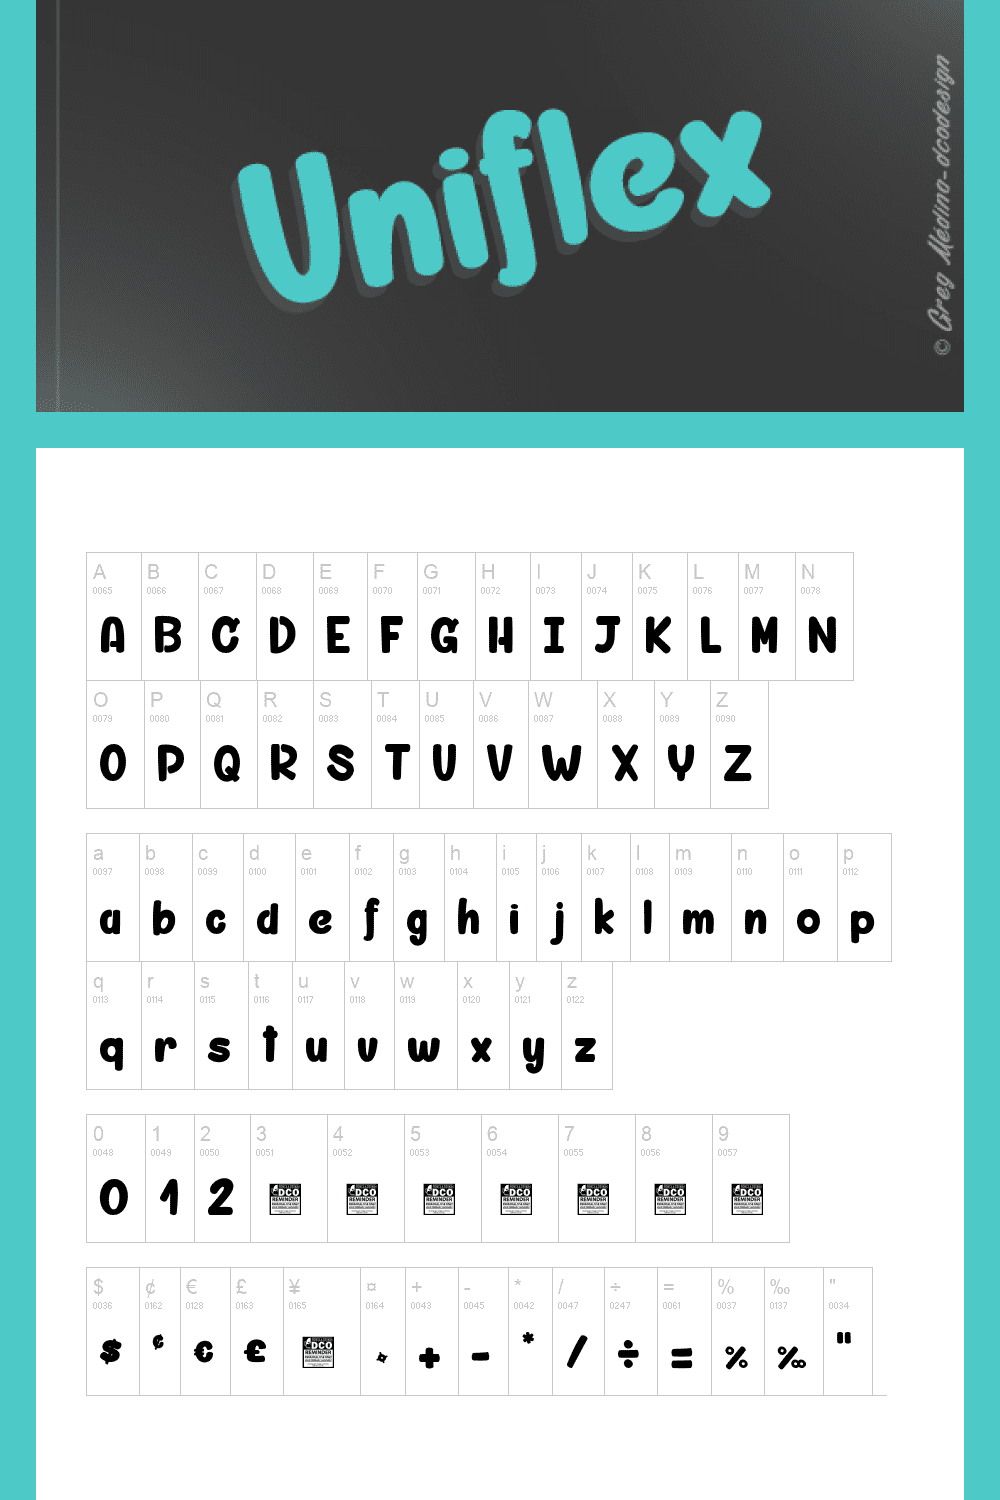 Embossed turquoise 3D font.